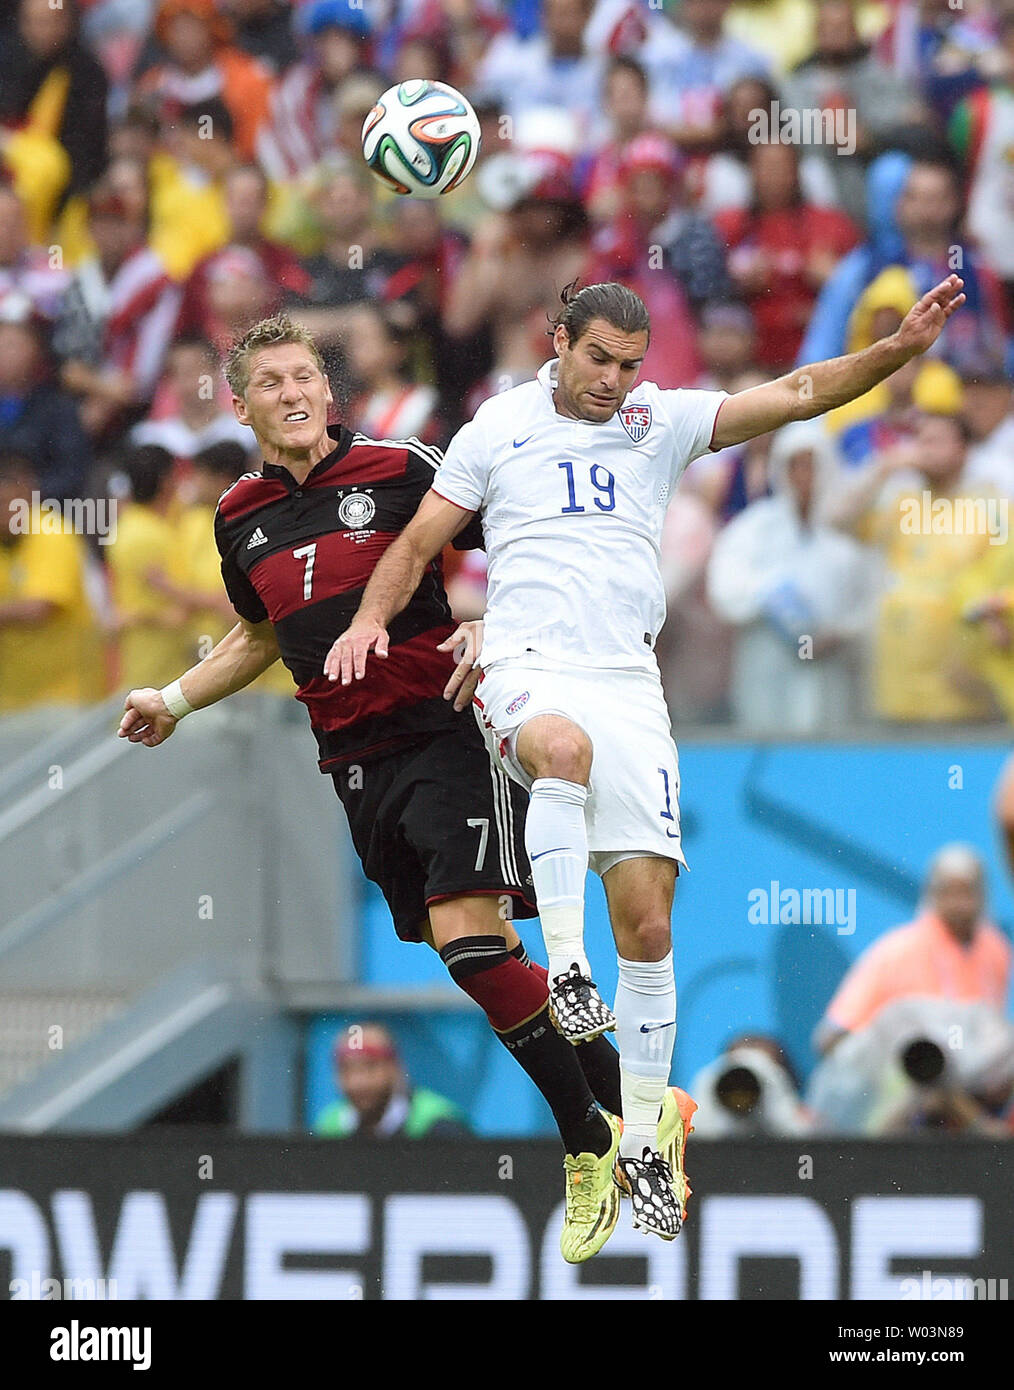 Graham Zusi of USA jumps for a header with Bastian Schweinsteiger (L) of Germany during the 2014 FIFA World Cup Group G match at the Arena Pernambuco in Recife, Brazil on June 26, 2014. UPI/Chris Brunskill Stock Photo